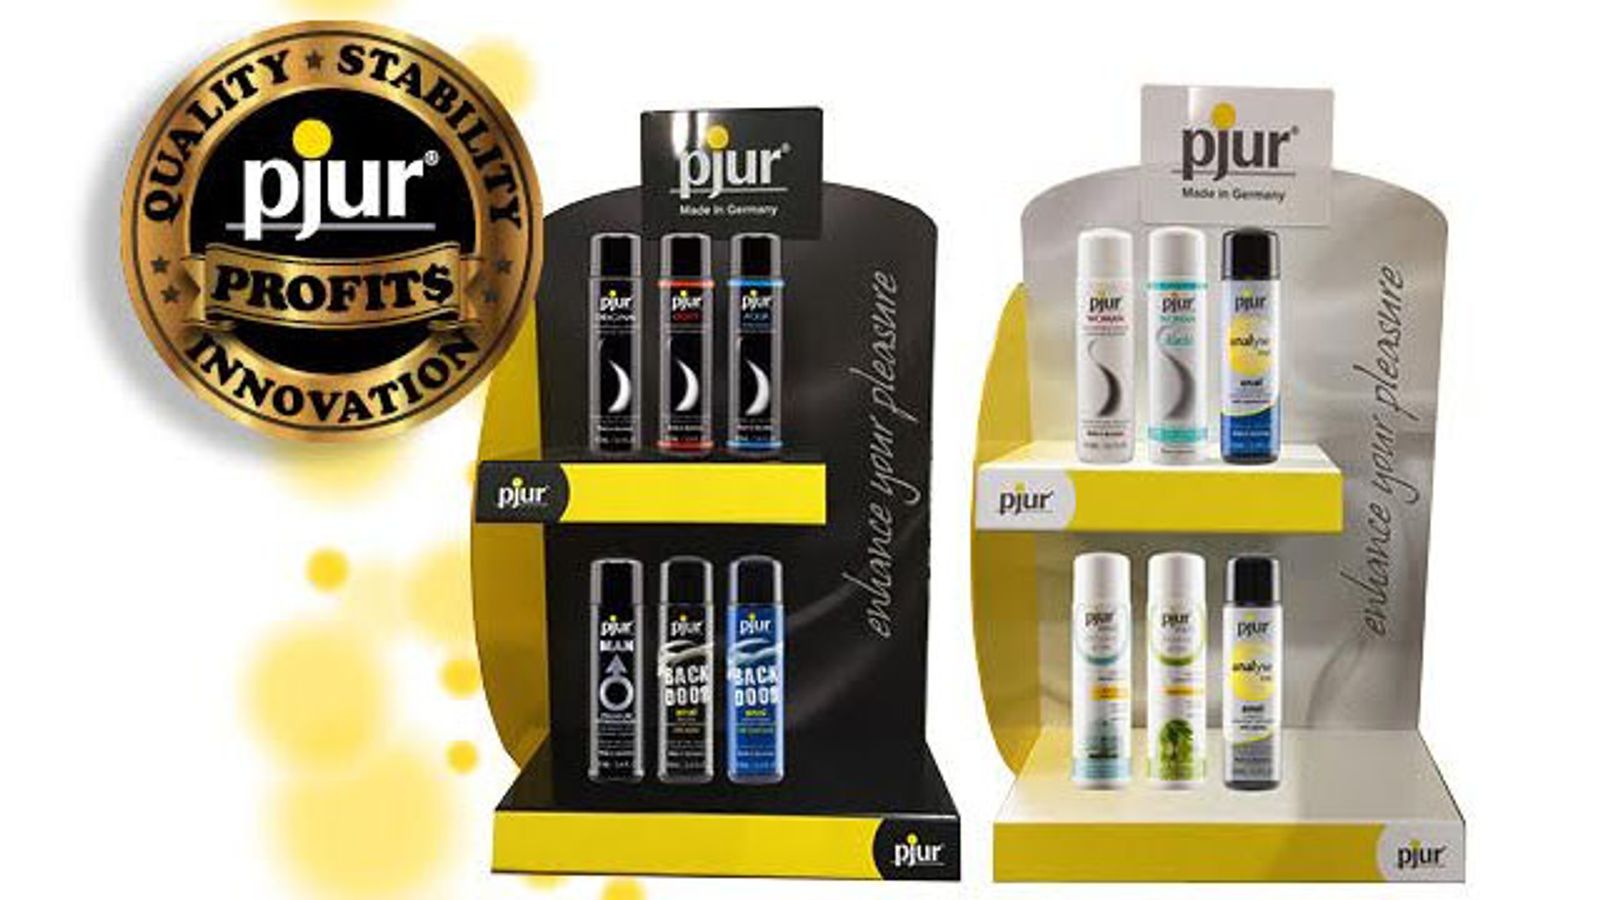 Modular Displays For Best Sellers Available From pjur group USA